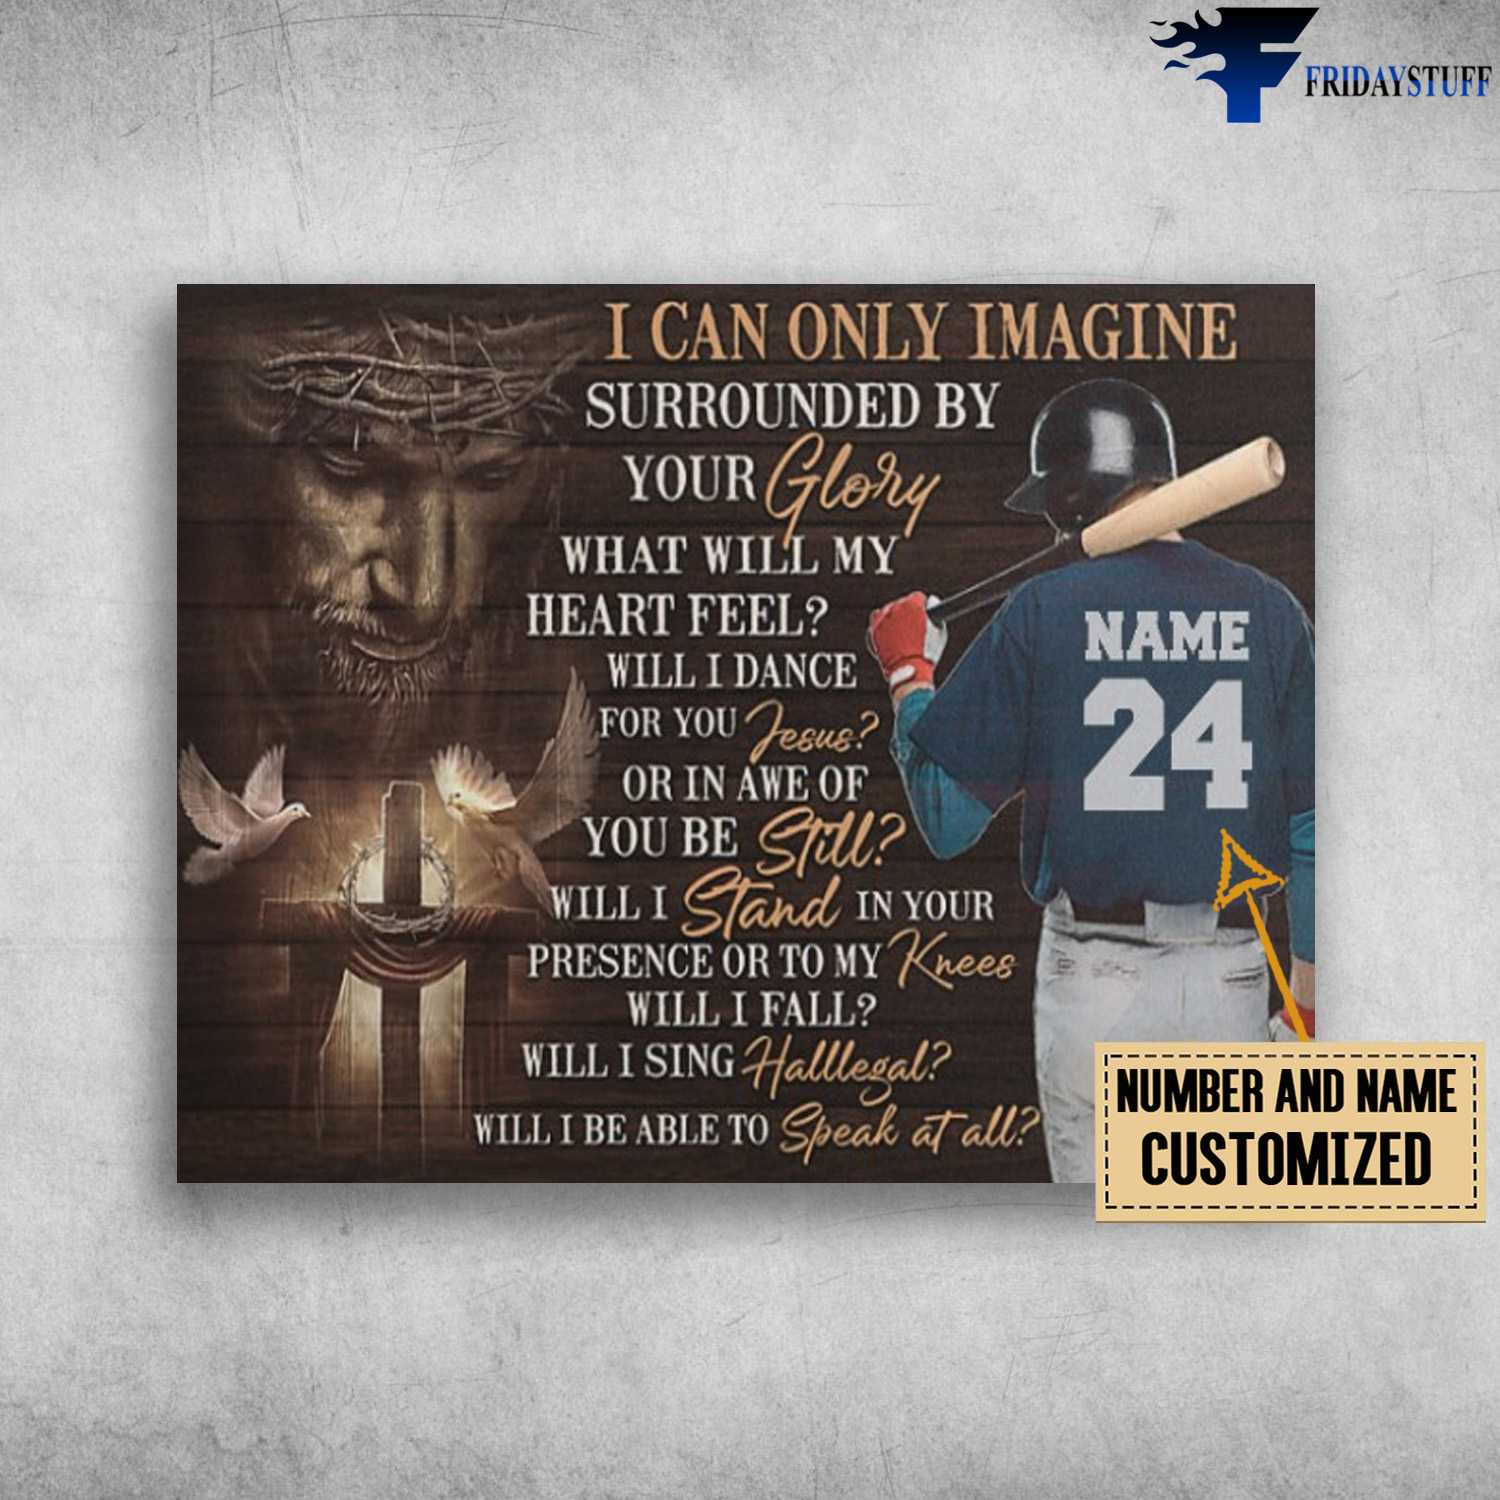 Baseball Poster, Baseball Man, Jesus Cross, I Can Only Imagine, Surrounded By Your Glory, What Will My Heart Feel, Will I Dance For You Jesus